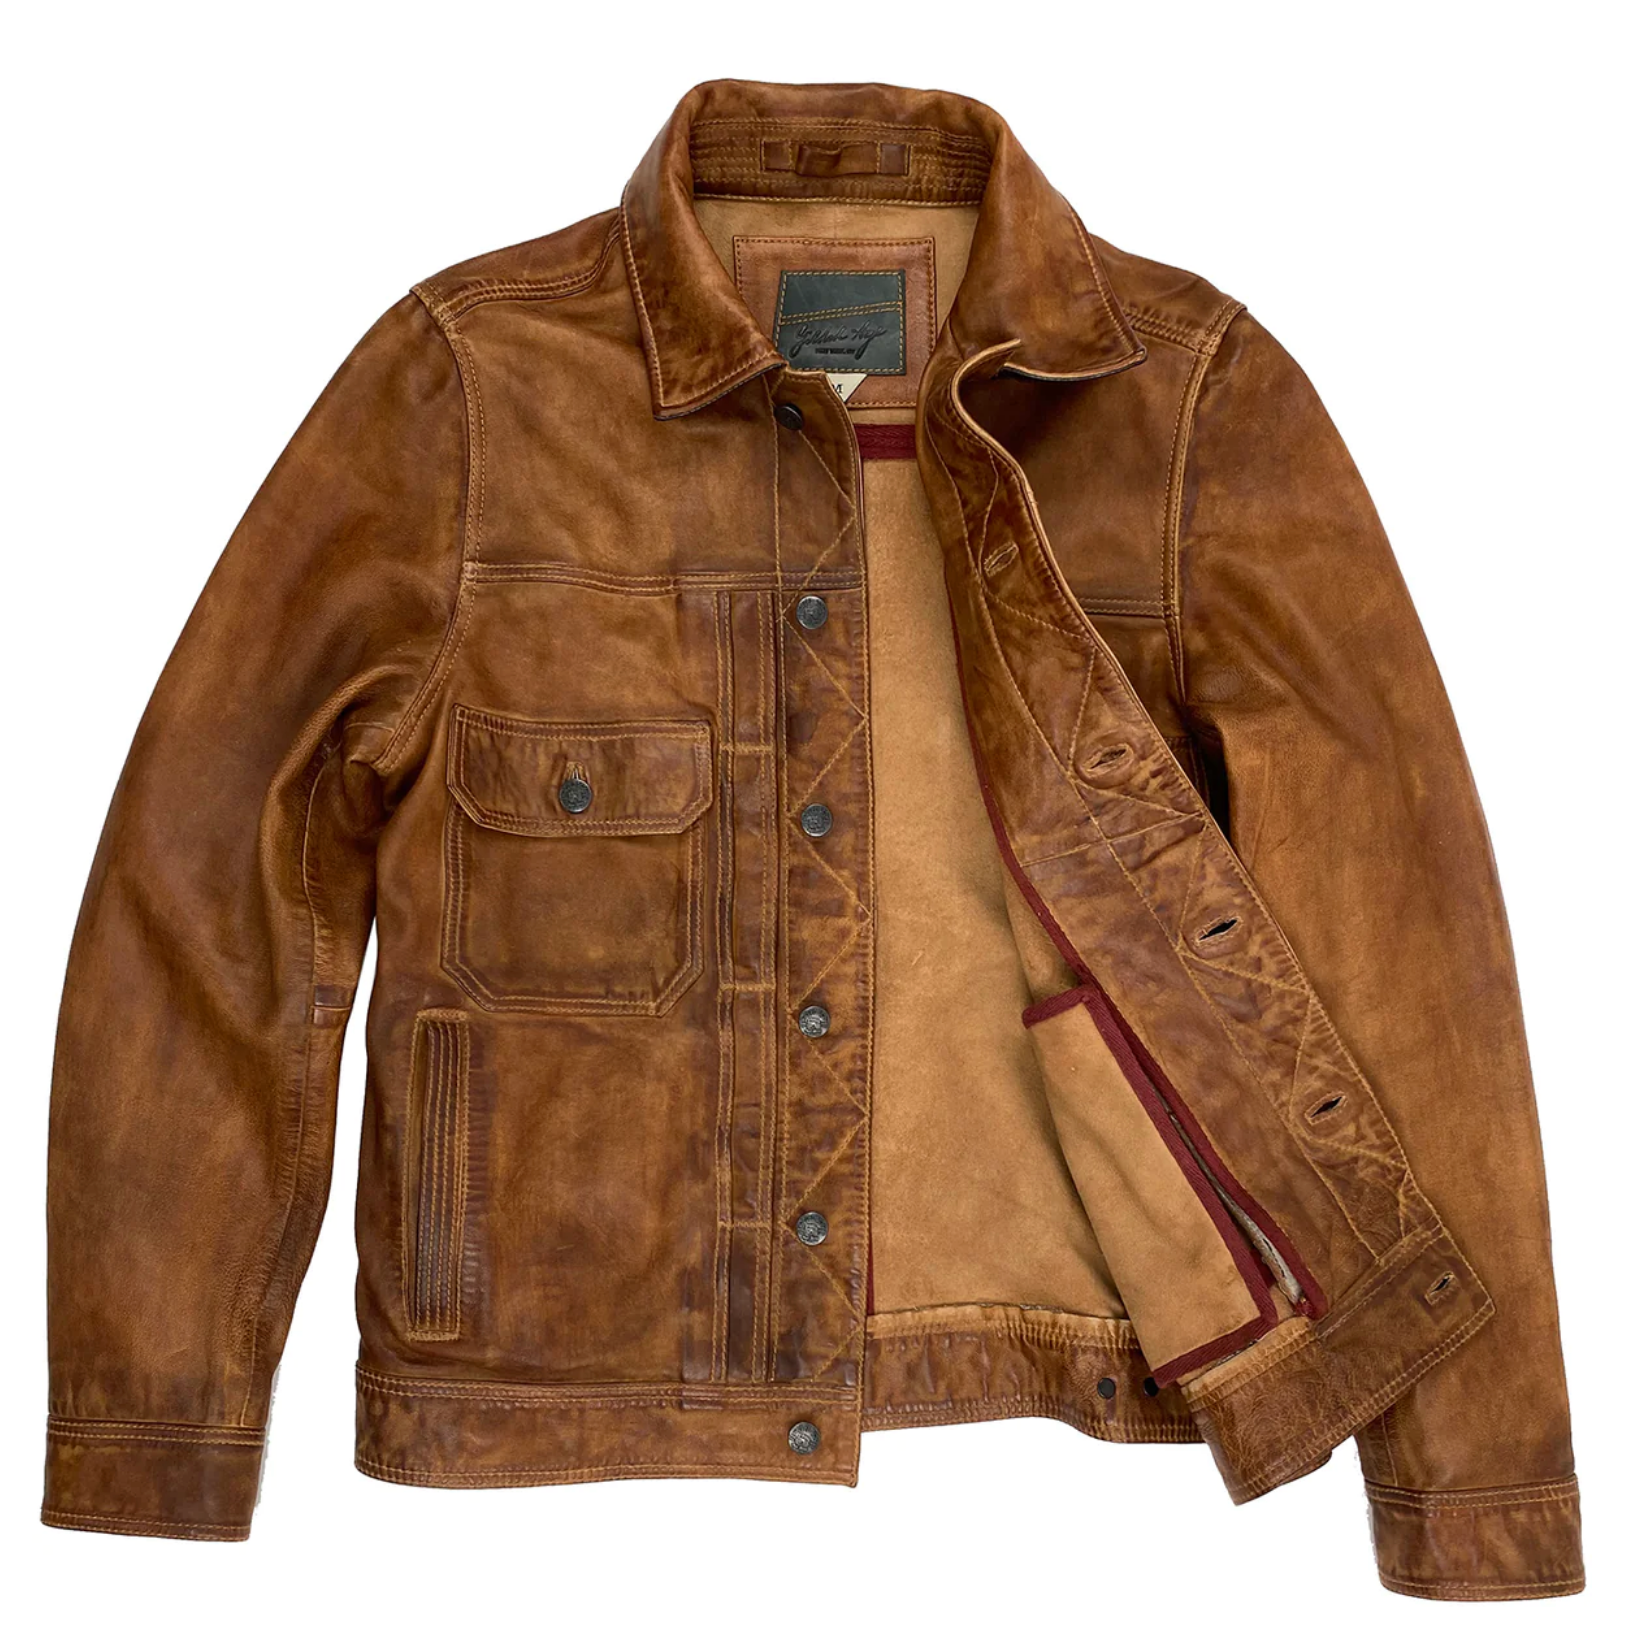 The Winslow Leather Shirt